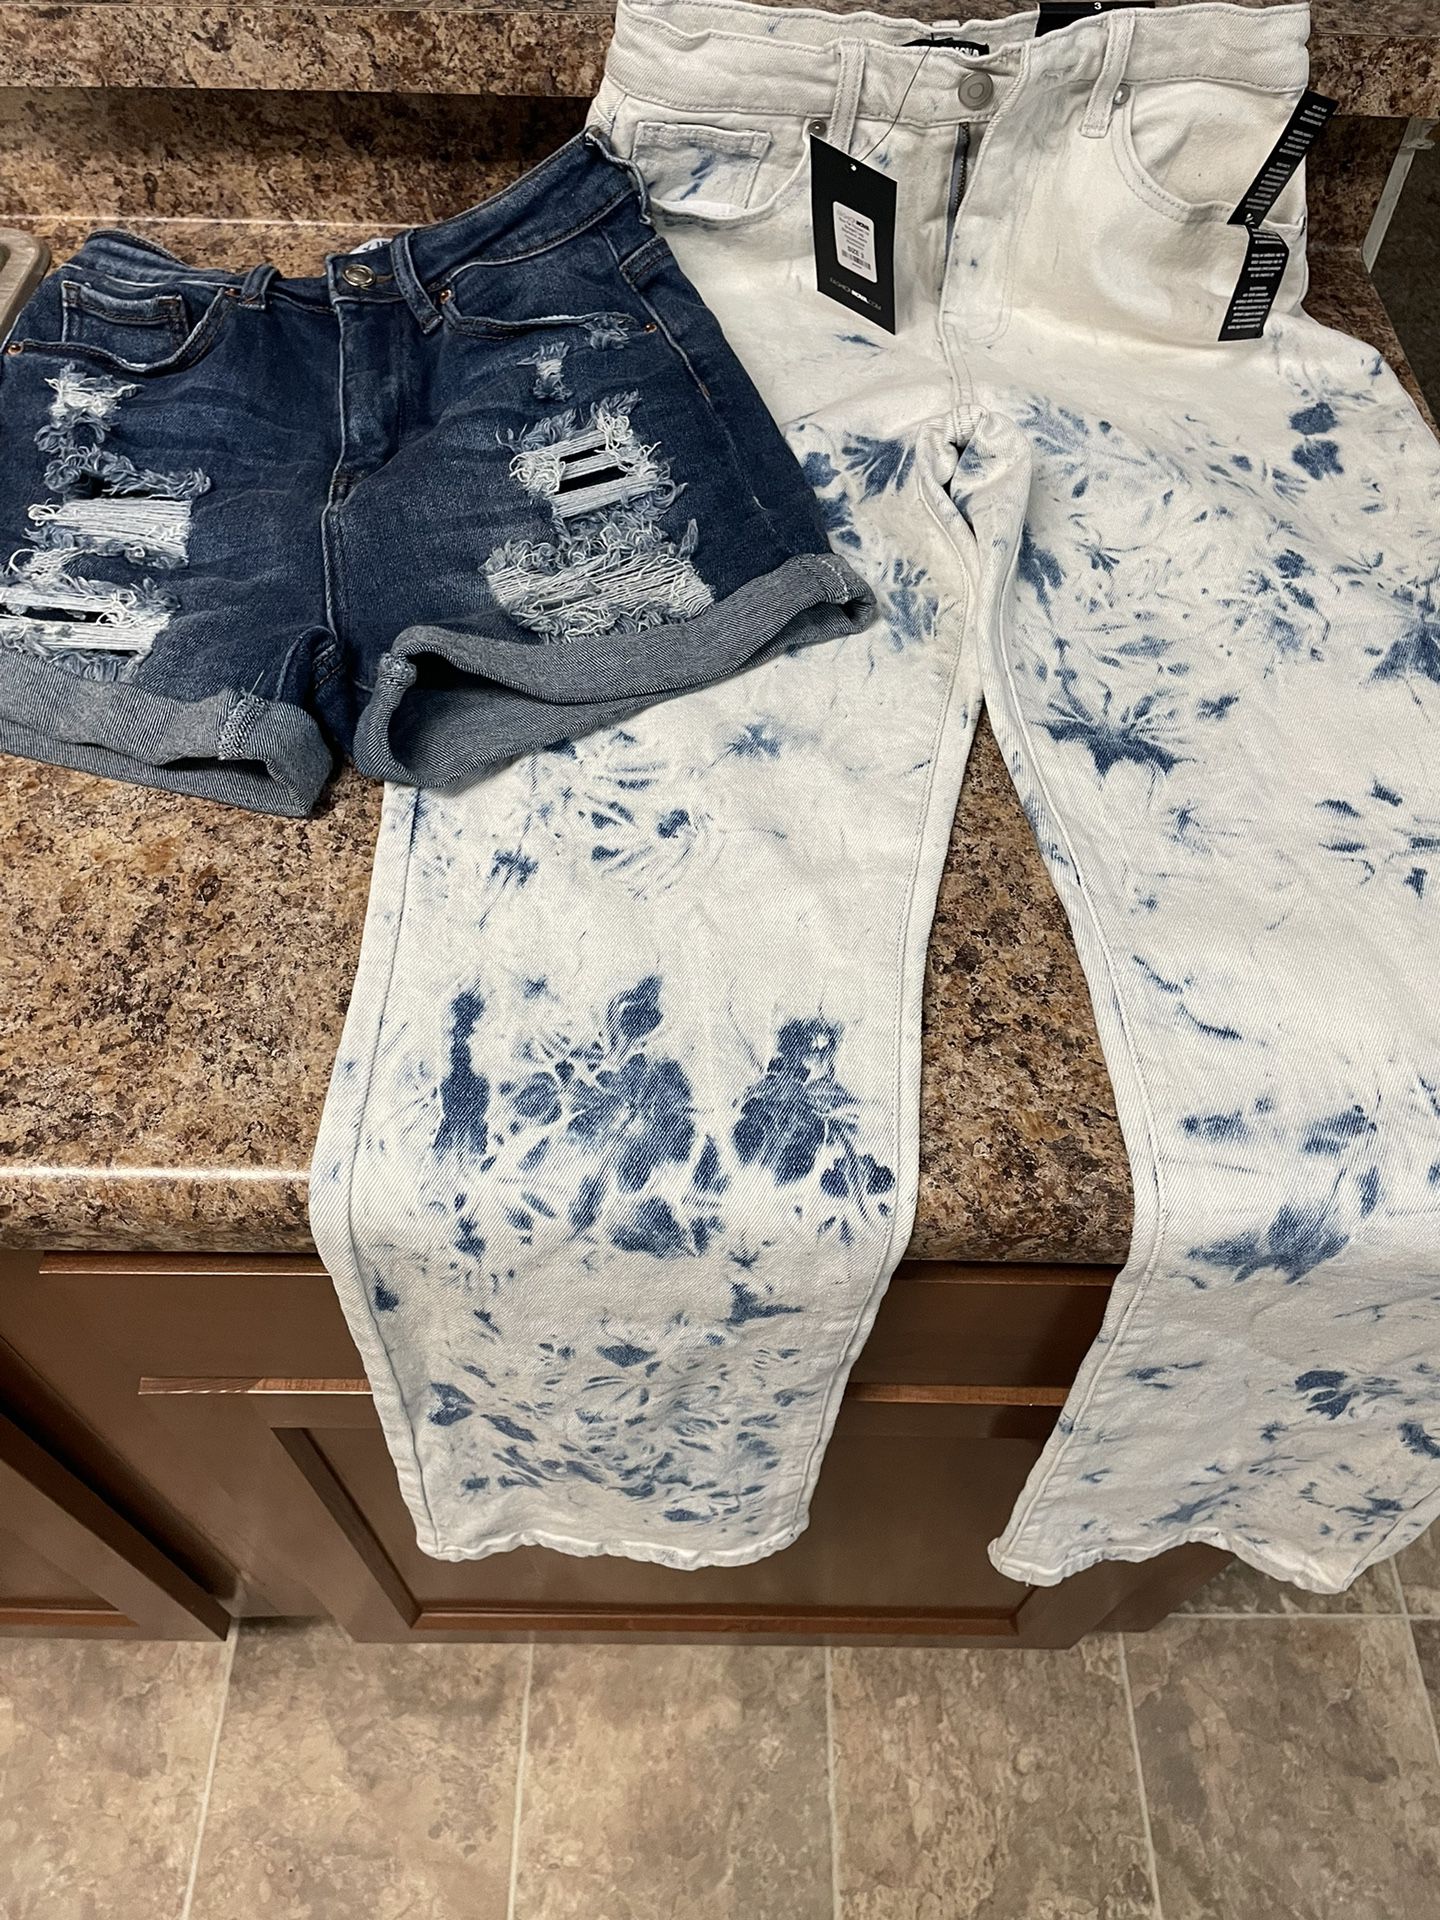 Jeans 2 For $15